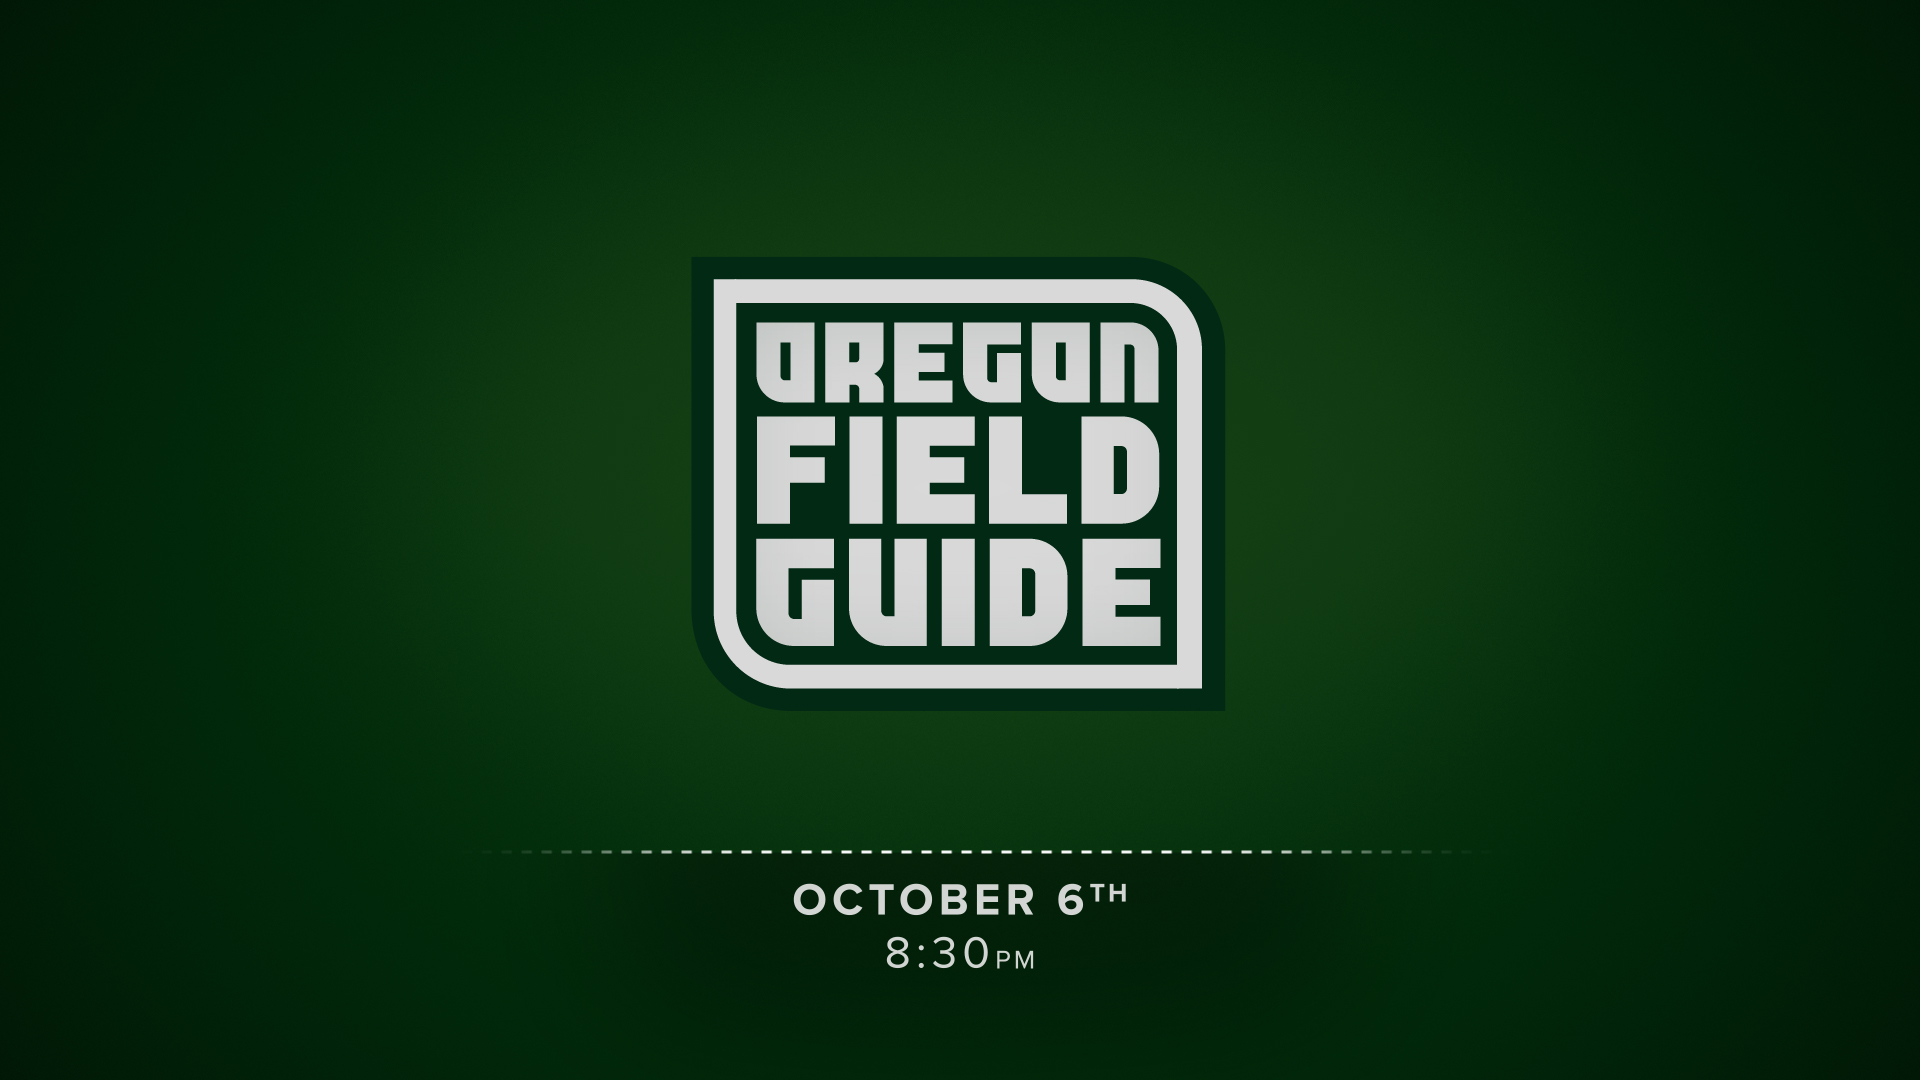 Promo for OPB's Oregon Field Guide showing the logo on a green background